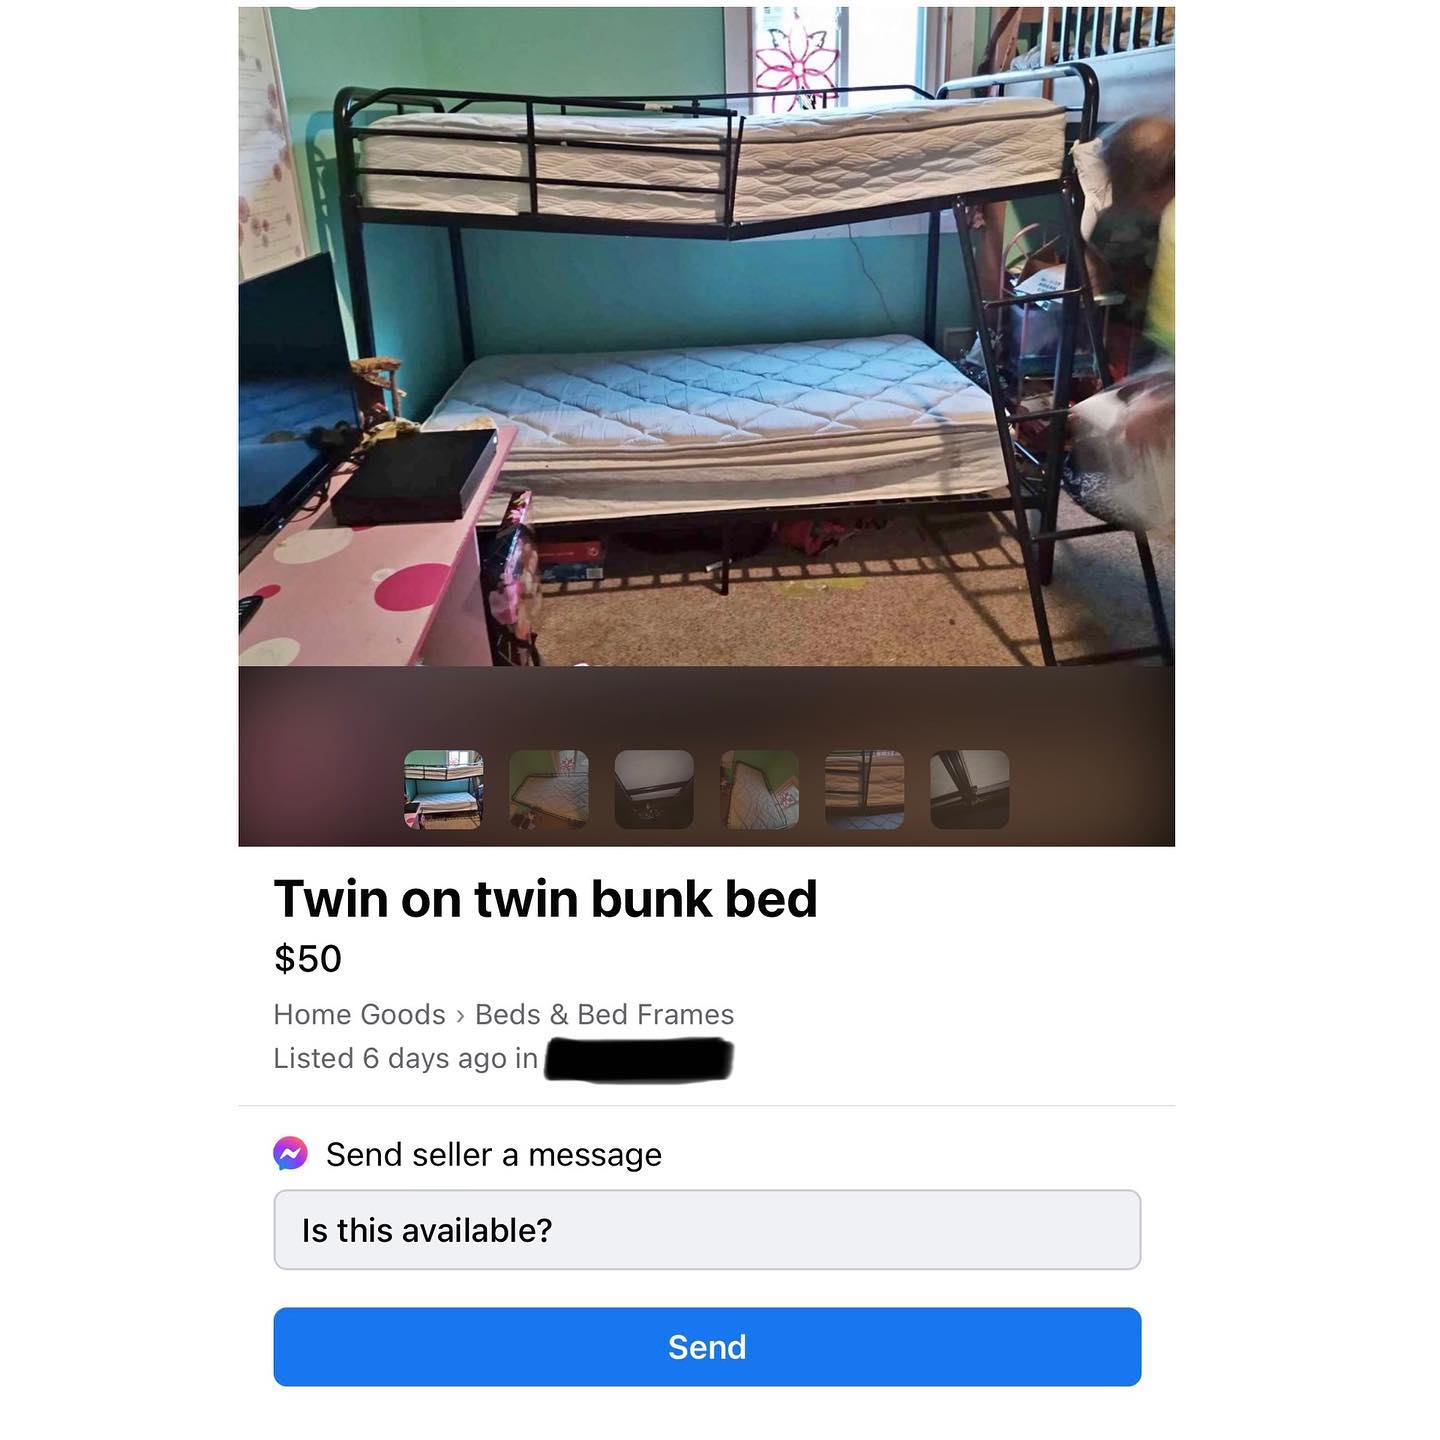 busted bunkbed being sold on Facebook marketplace